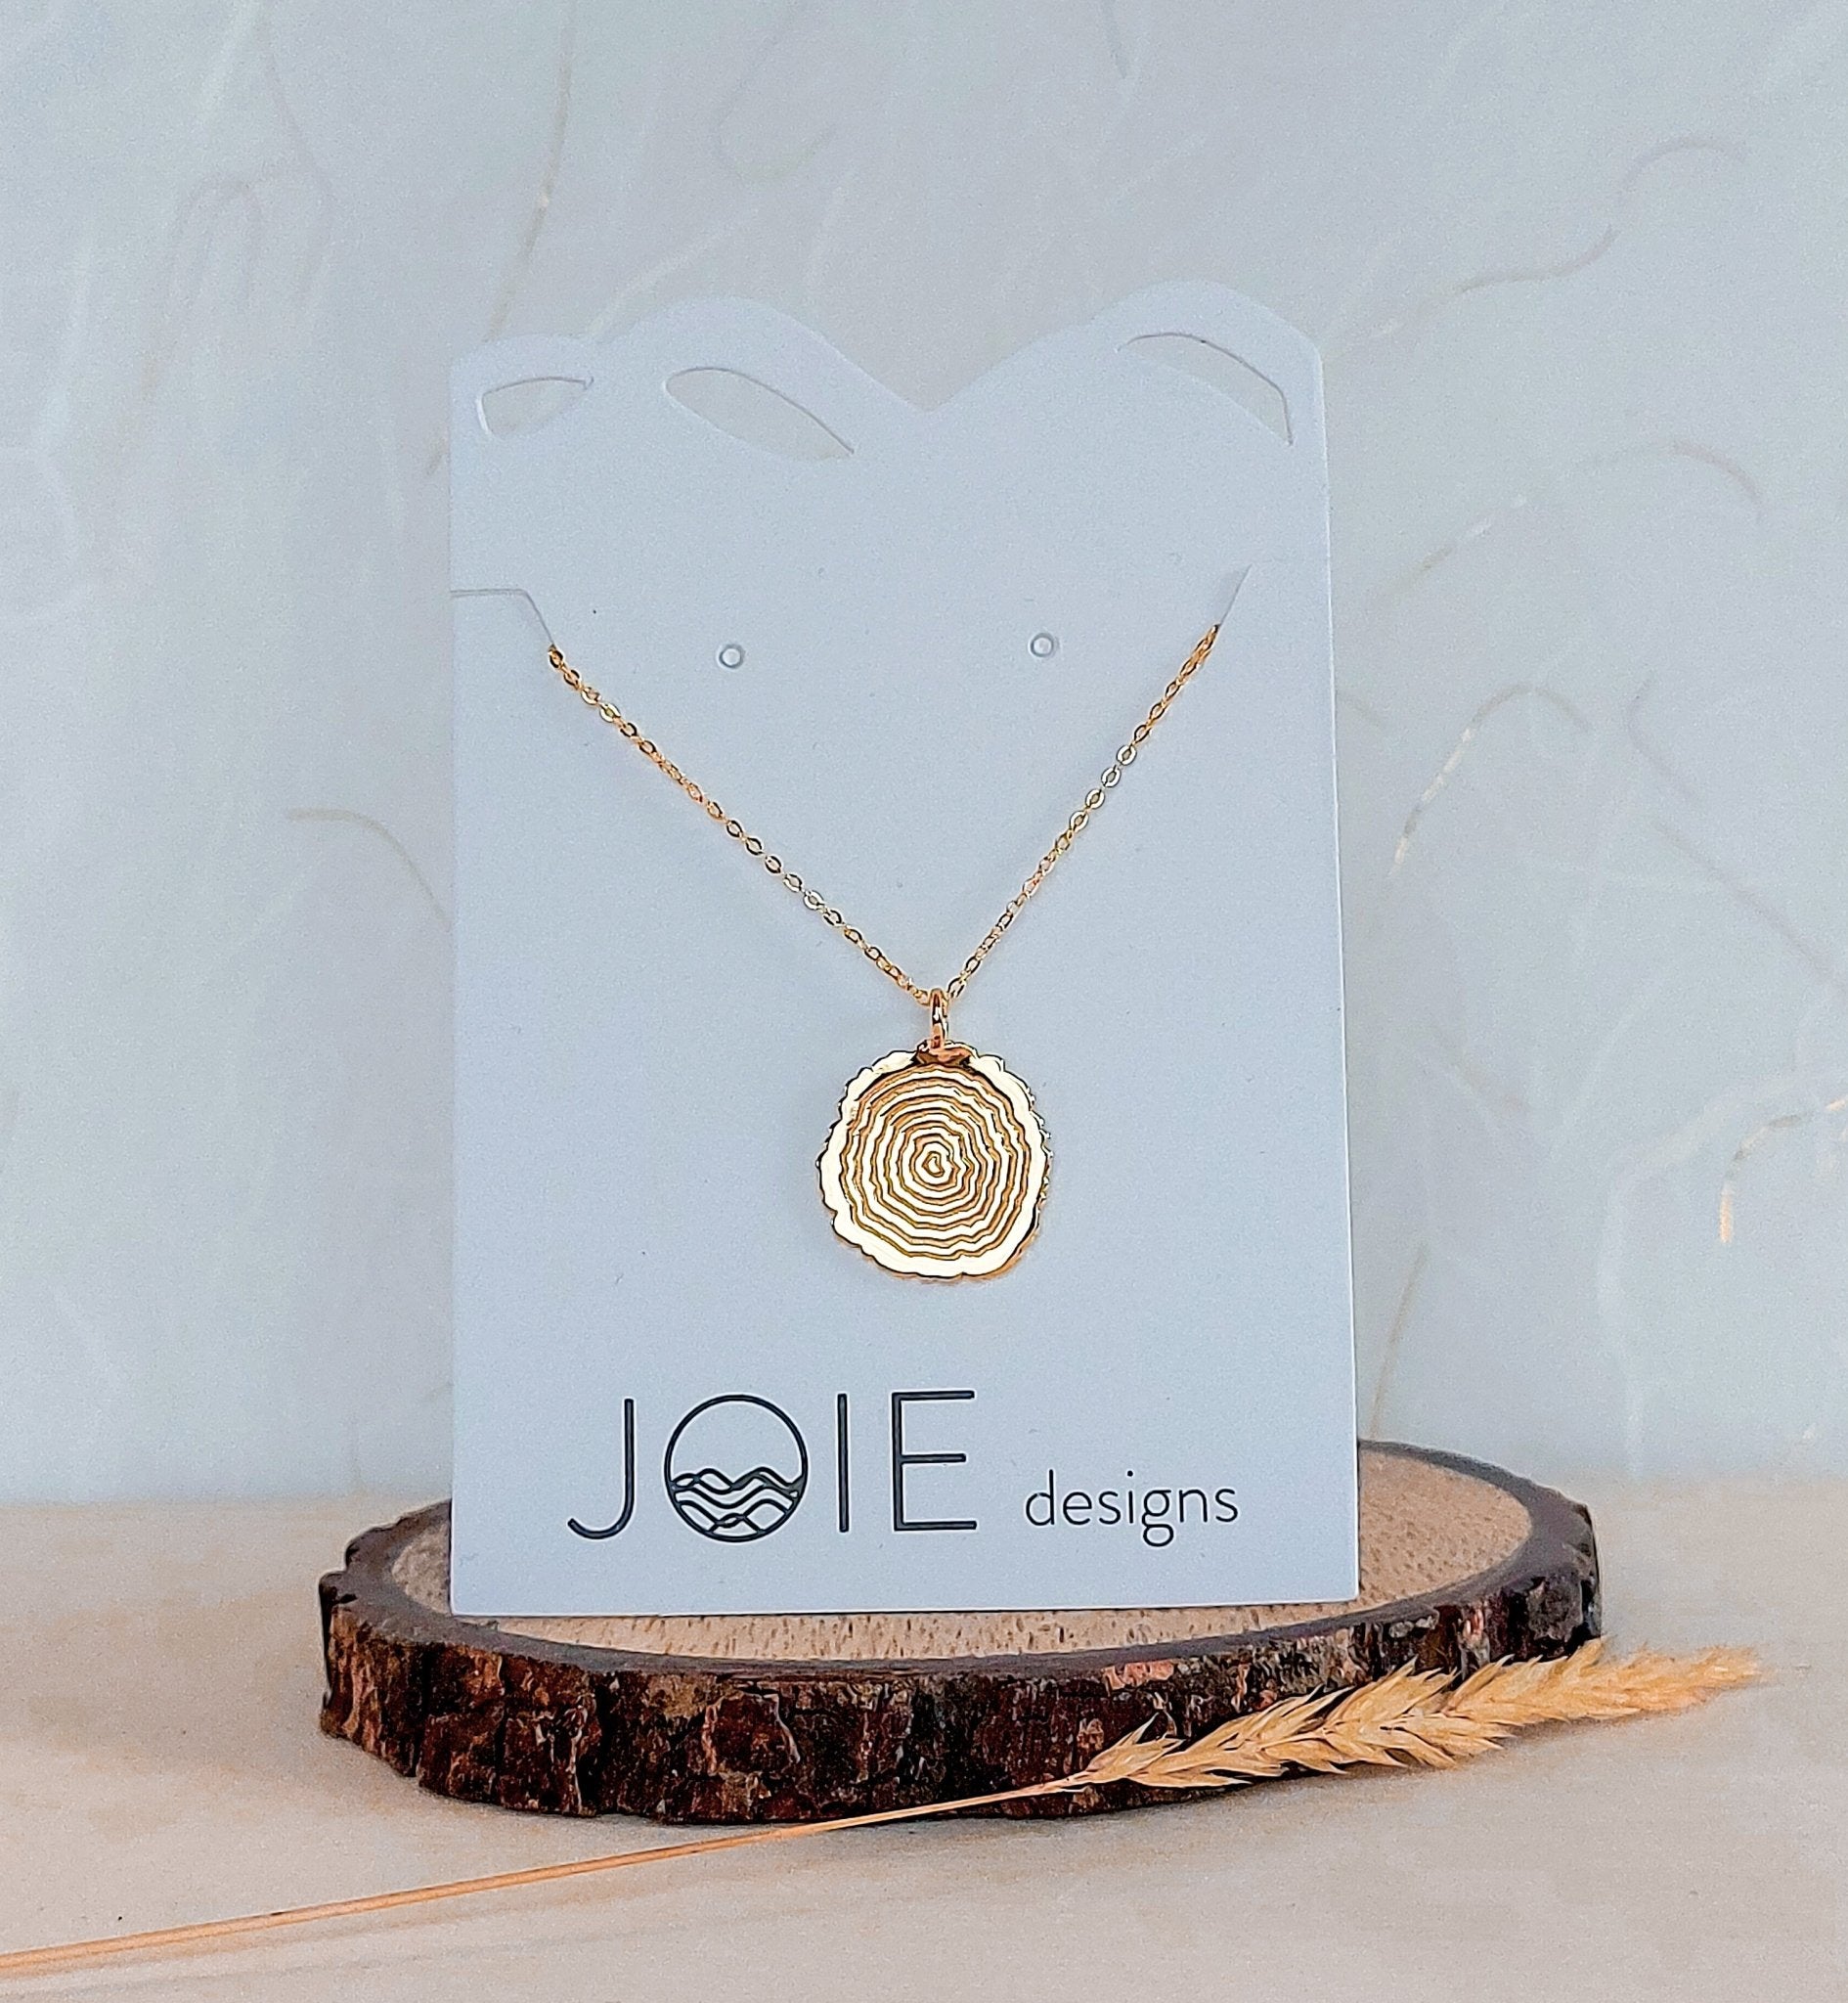 18k yellow gold plated tree rings inspired pendant necklace showcased on a jewellery card